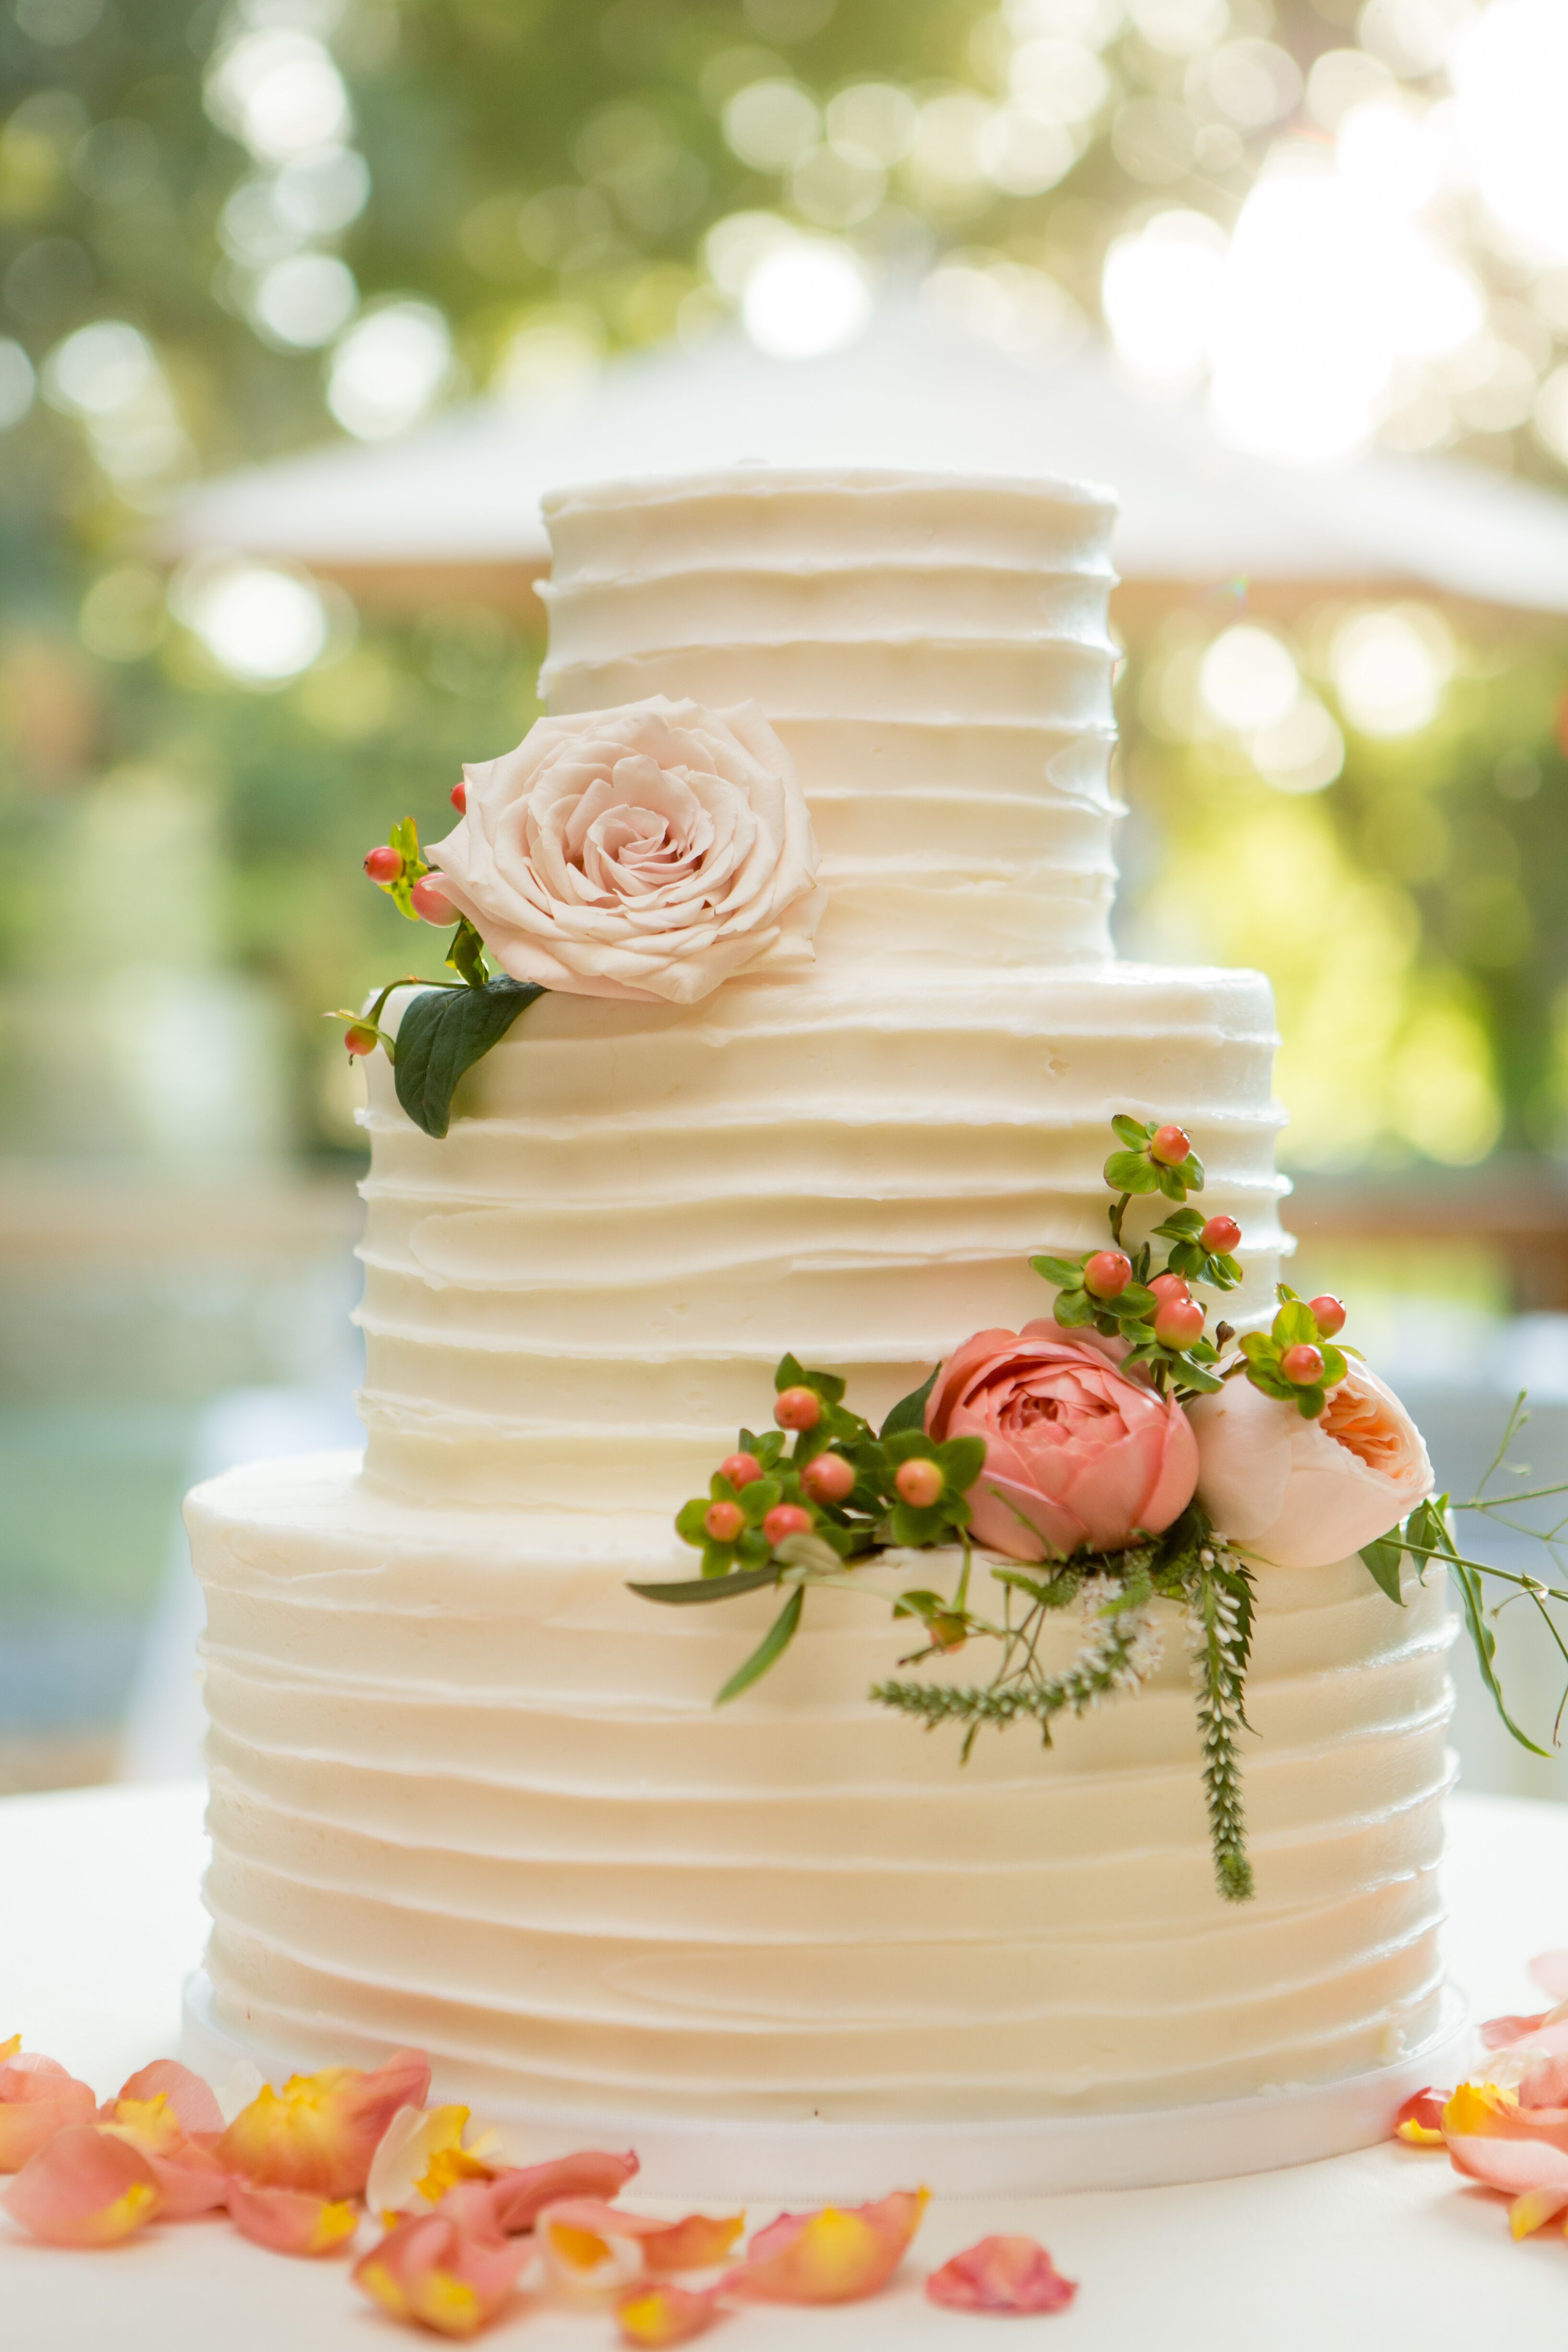 Classic Simple Rough Frosted Wedding Cake 